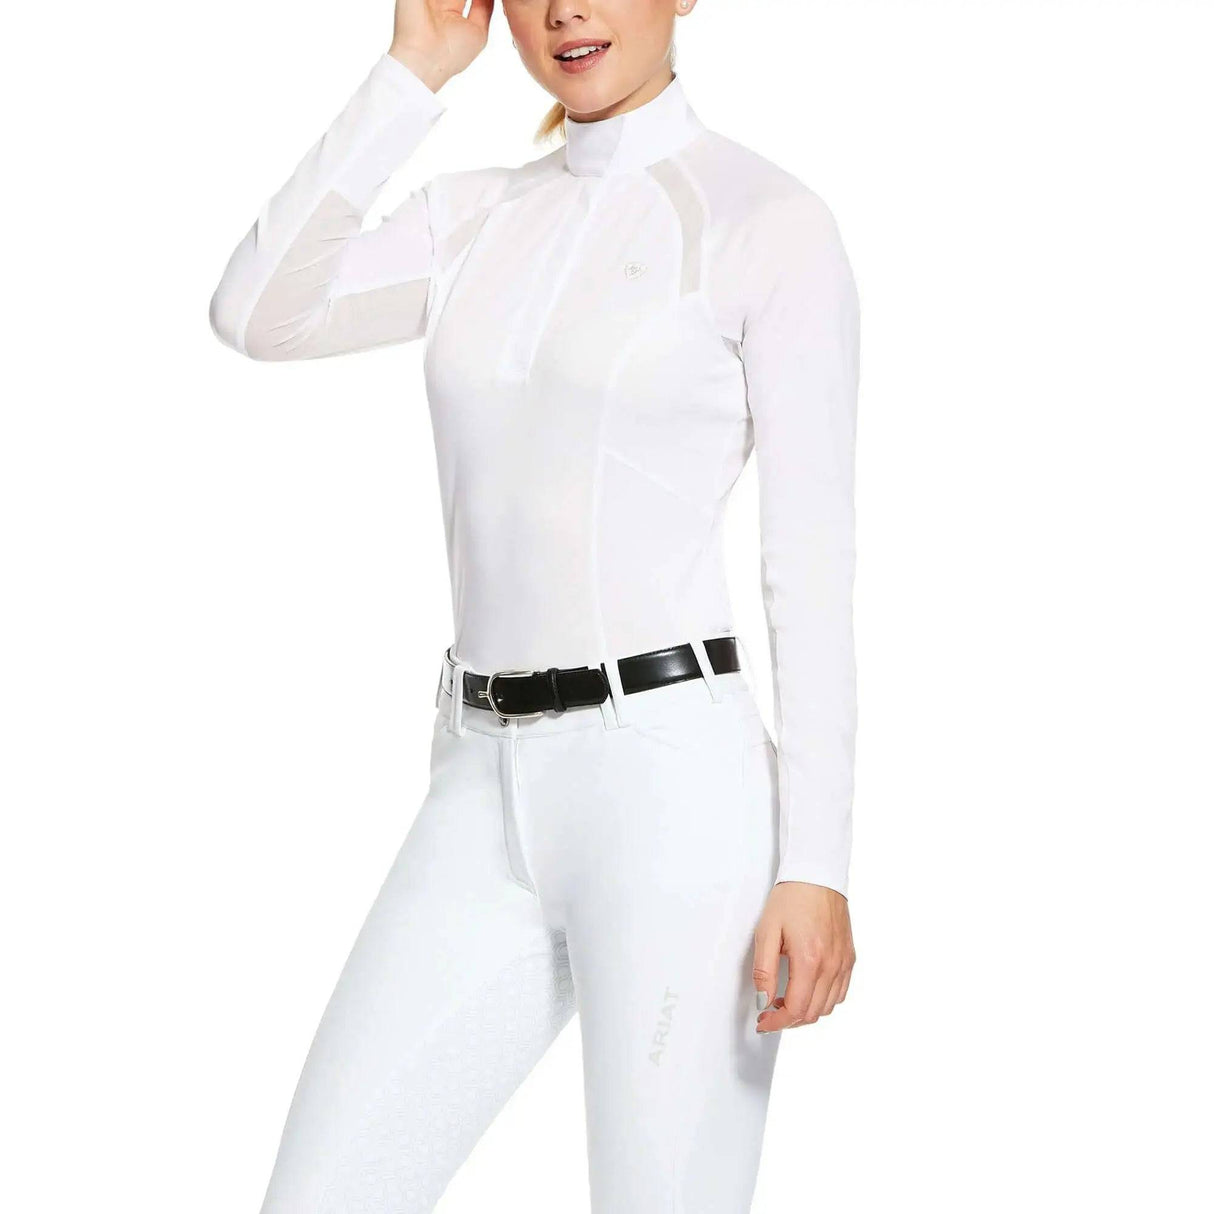 Ariat Sunstoppers Show Shirts White Large Ariat Show Shirts Barnstaple Equestrian Supplies